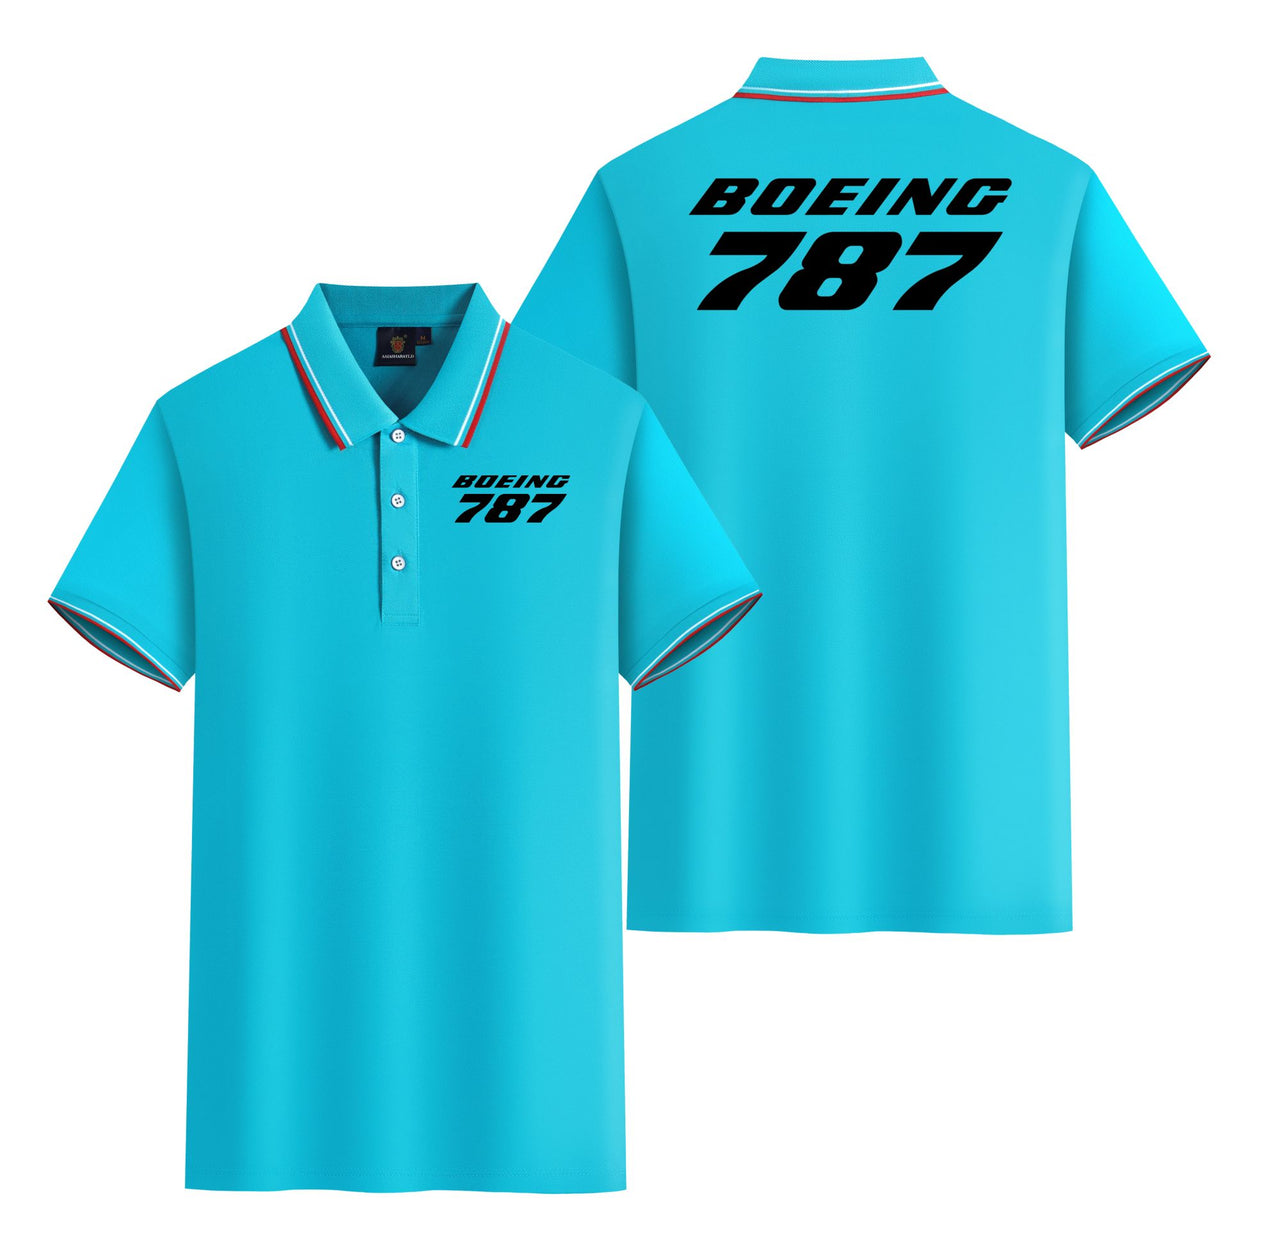 Boeing 787 & Text Designed Stylish Polo T-Shirts (Double-Side)